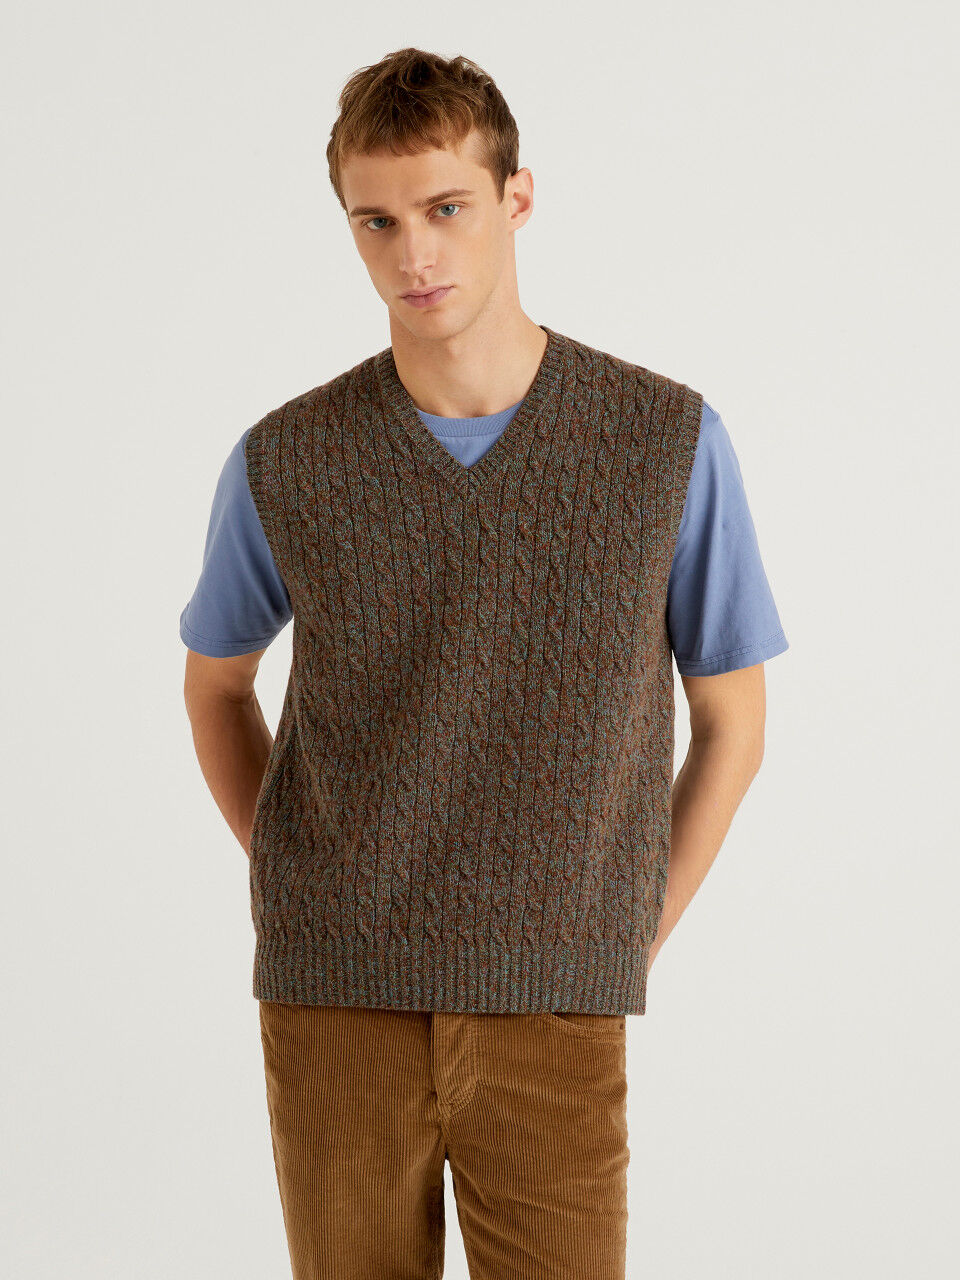 United Colors of Benetton Knitted Vest light brown weave pattern casual look Fashion Vests Knitted Vests 